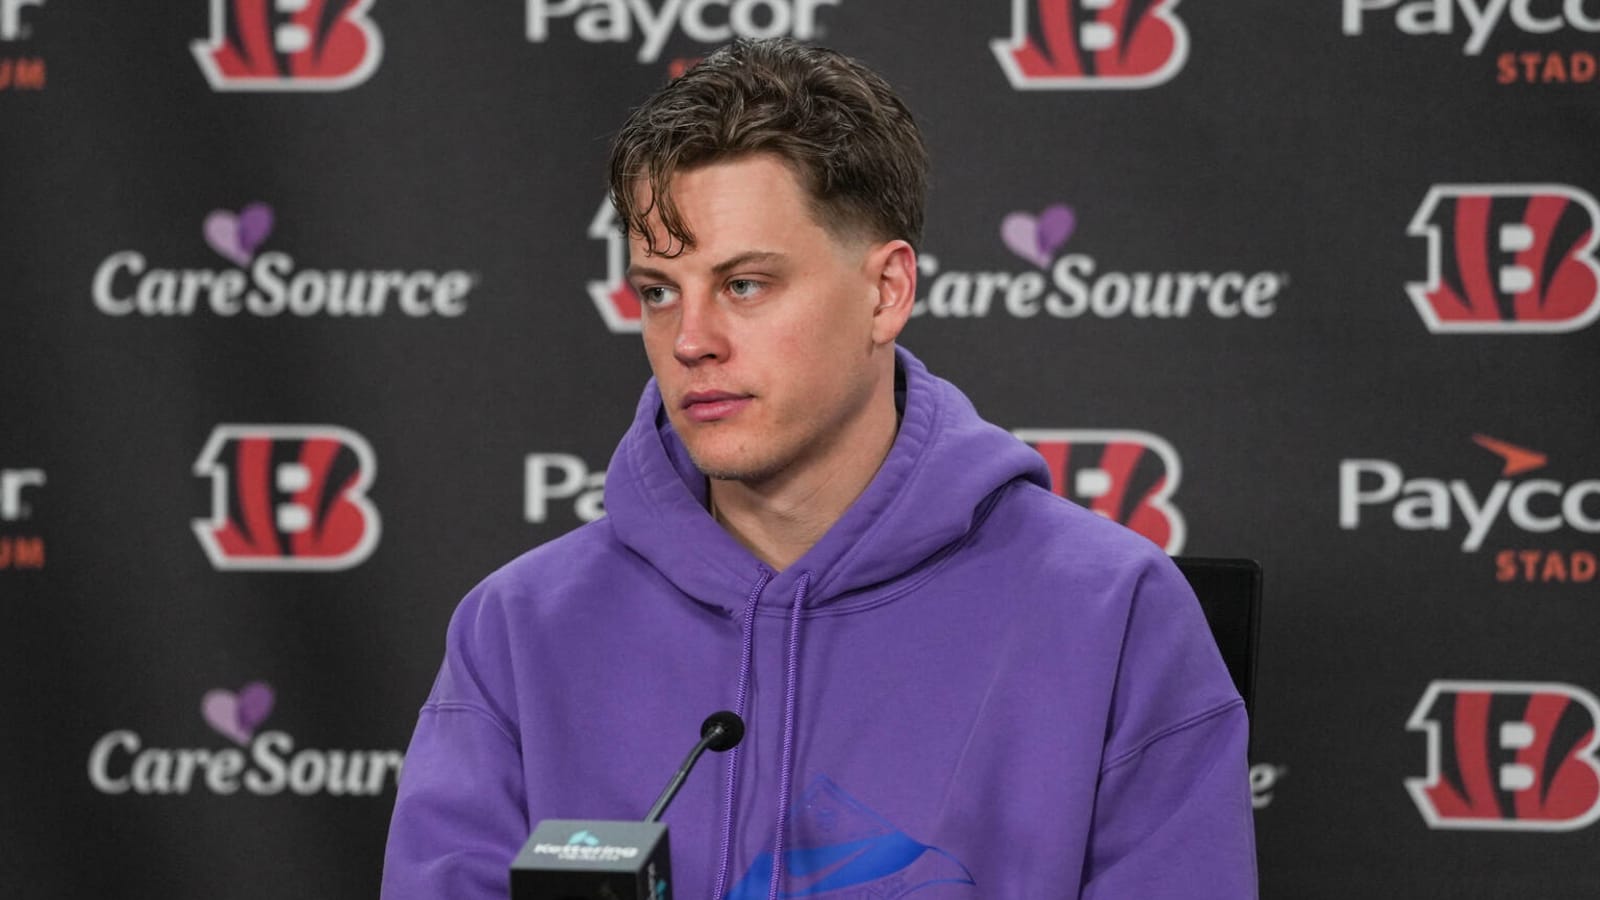 Bengals' Joe Burrow hits significant milestone in injury recovery